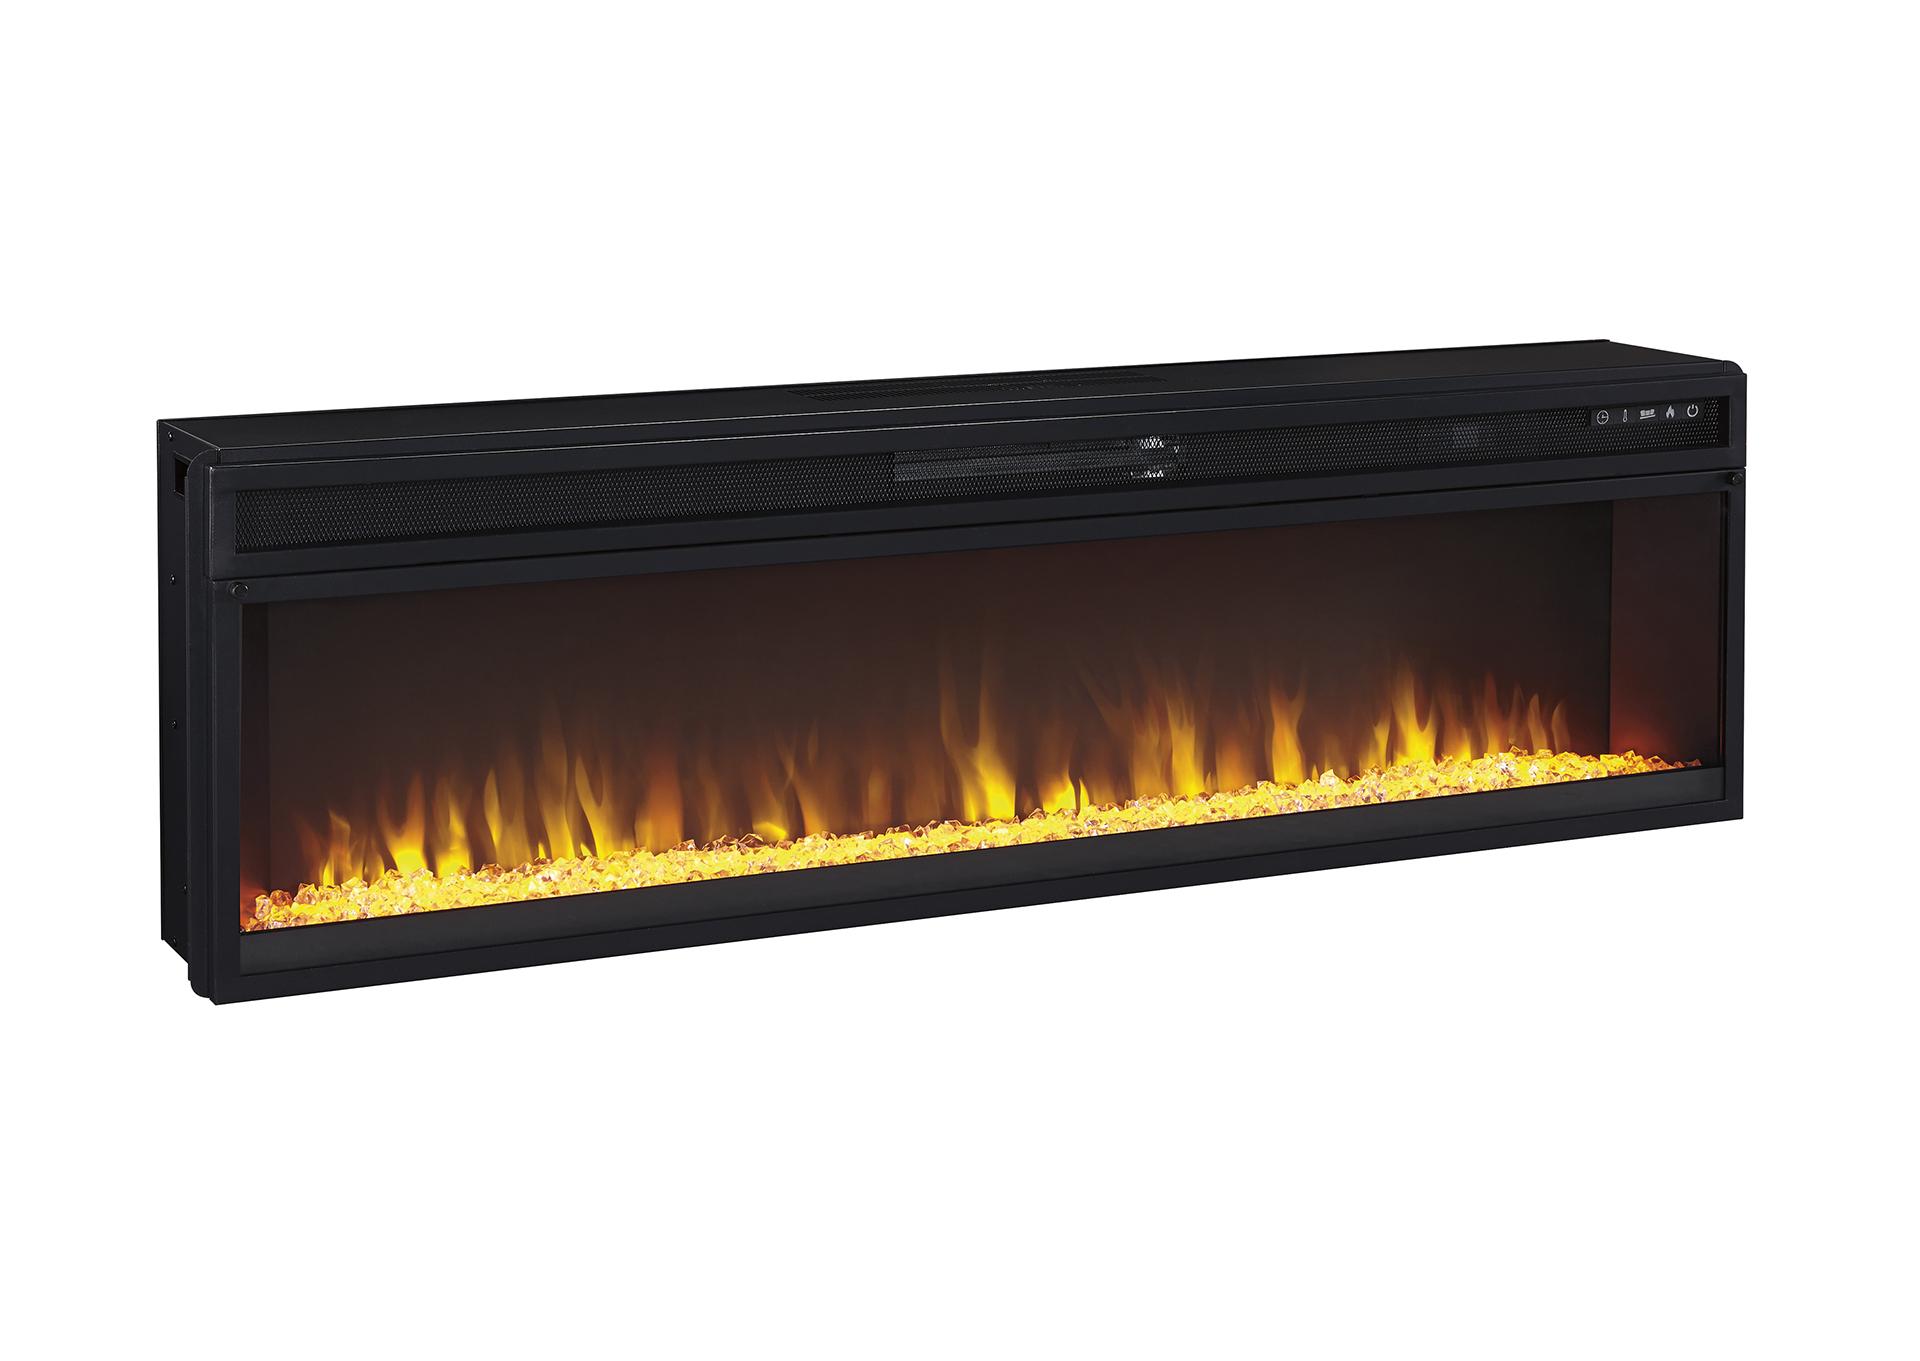 ENTERTAINMENT ACCESSORIES WIDE FIREPLACE INSERT